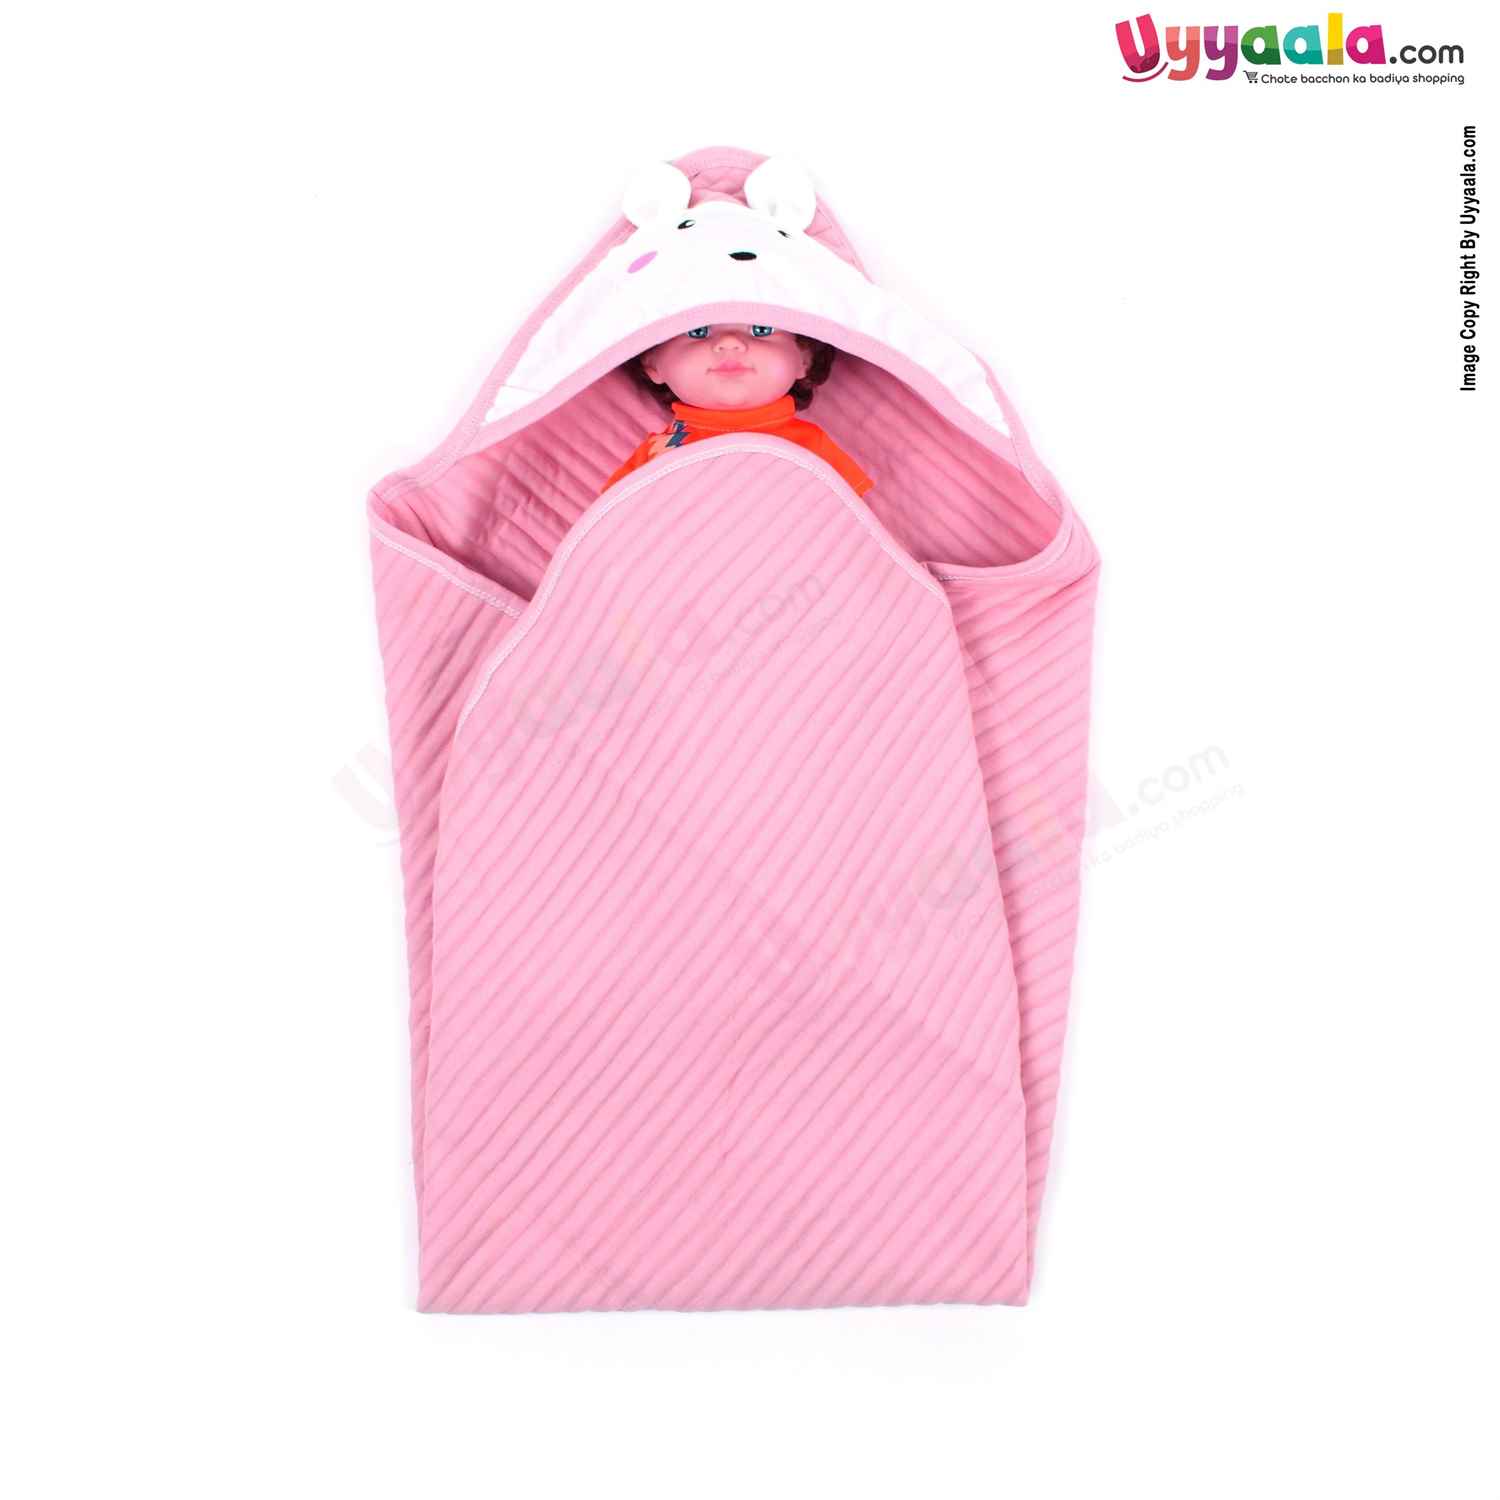 Thermal Hood Blanket Rabbit Character 0-24m Age,Pink